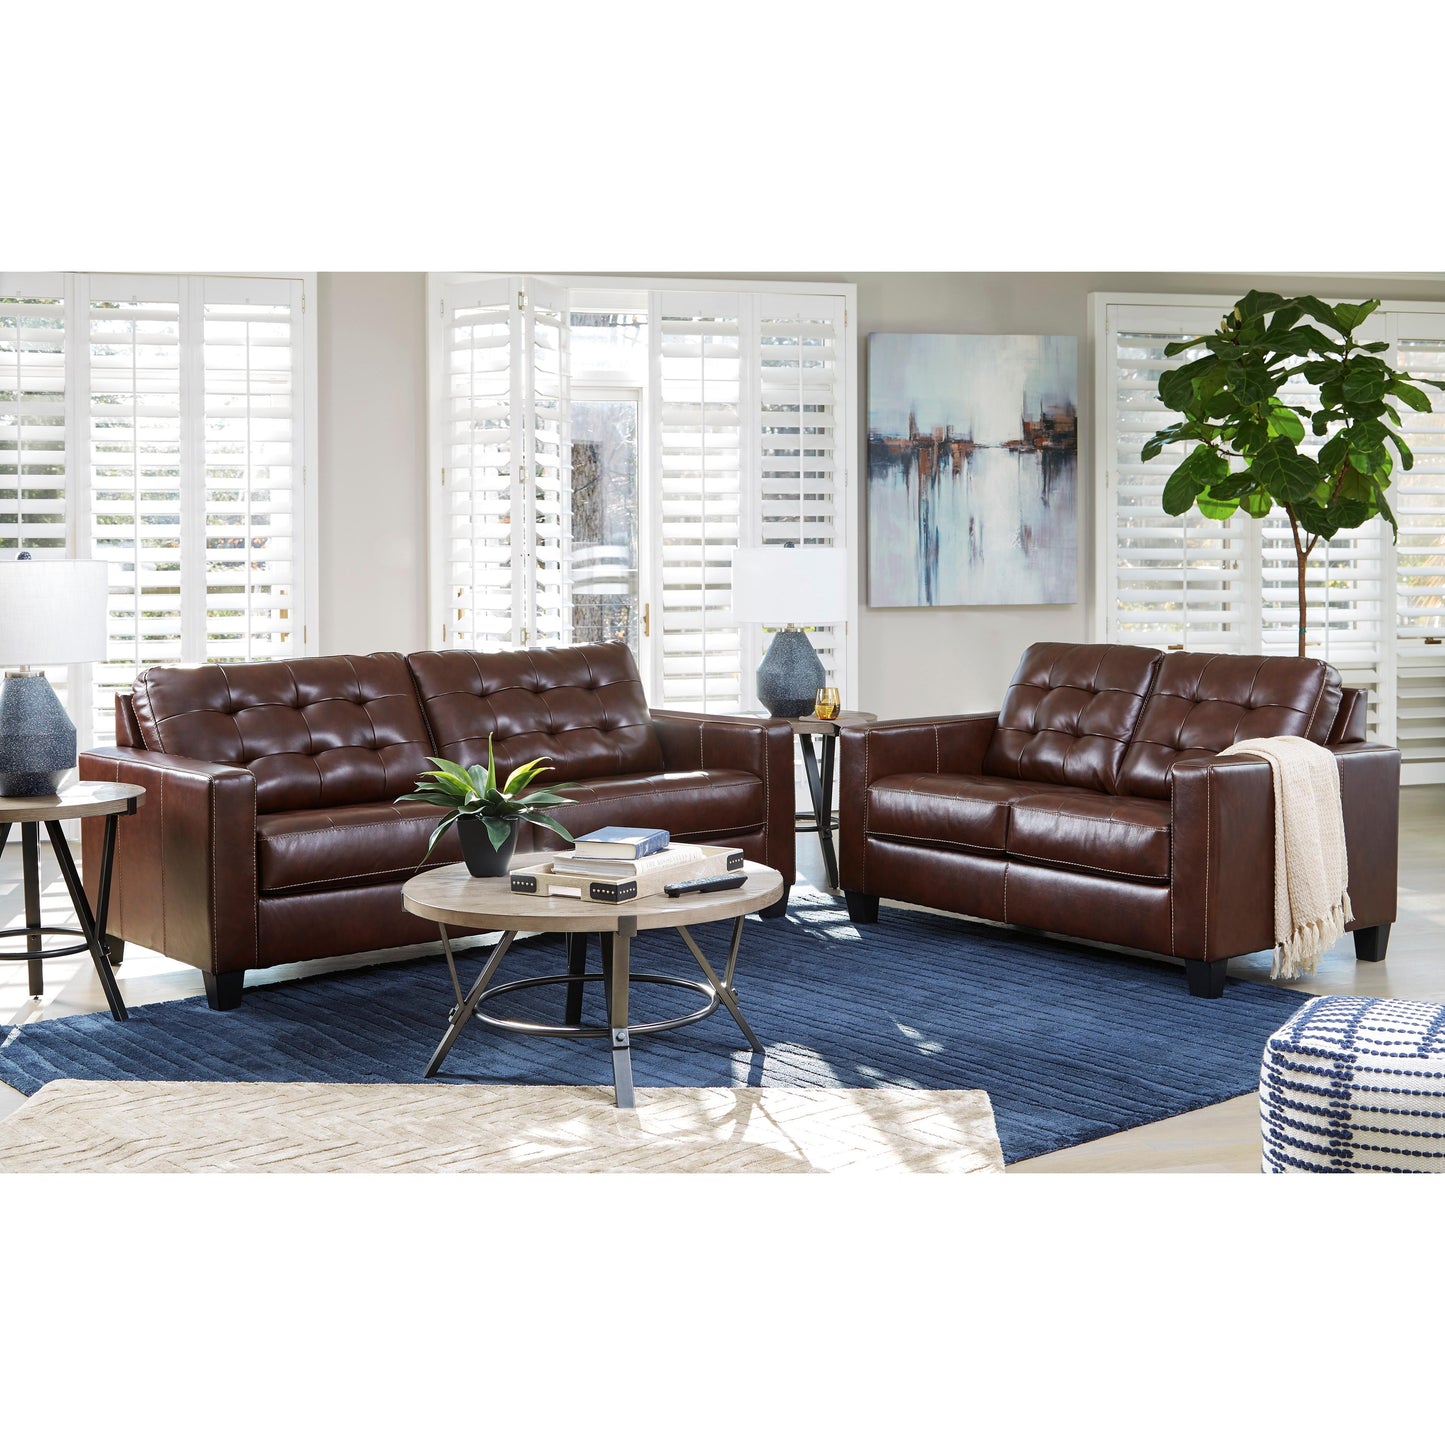 Signature Design by Ashley Altonbury Leather Match Queen Sofabed 8750439